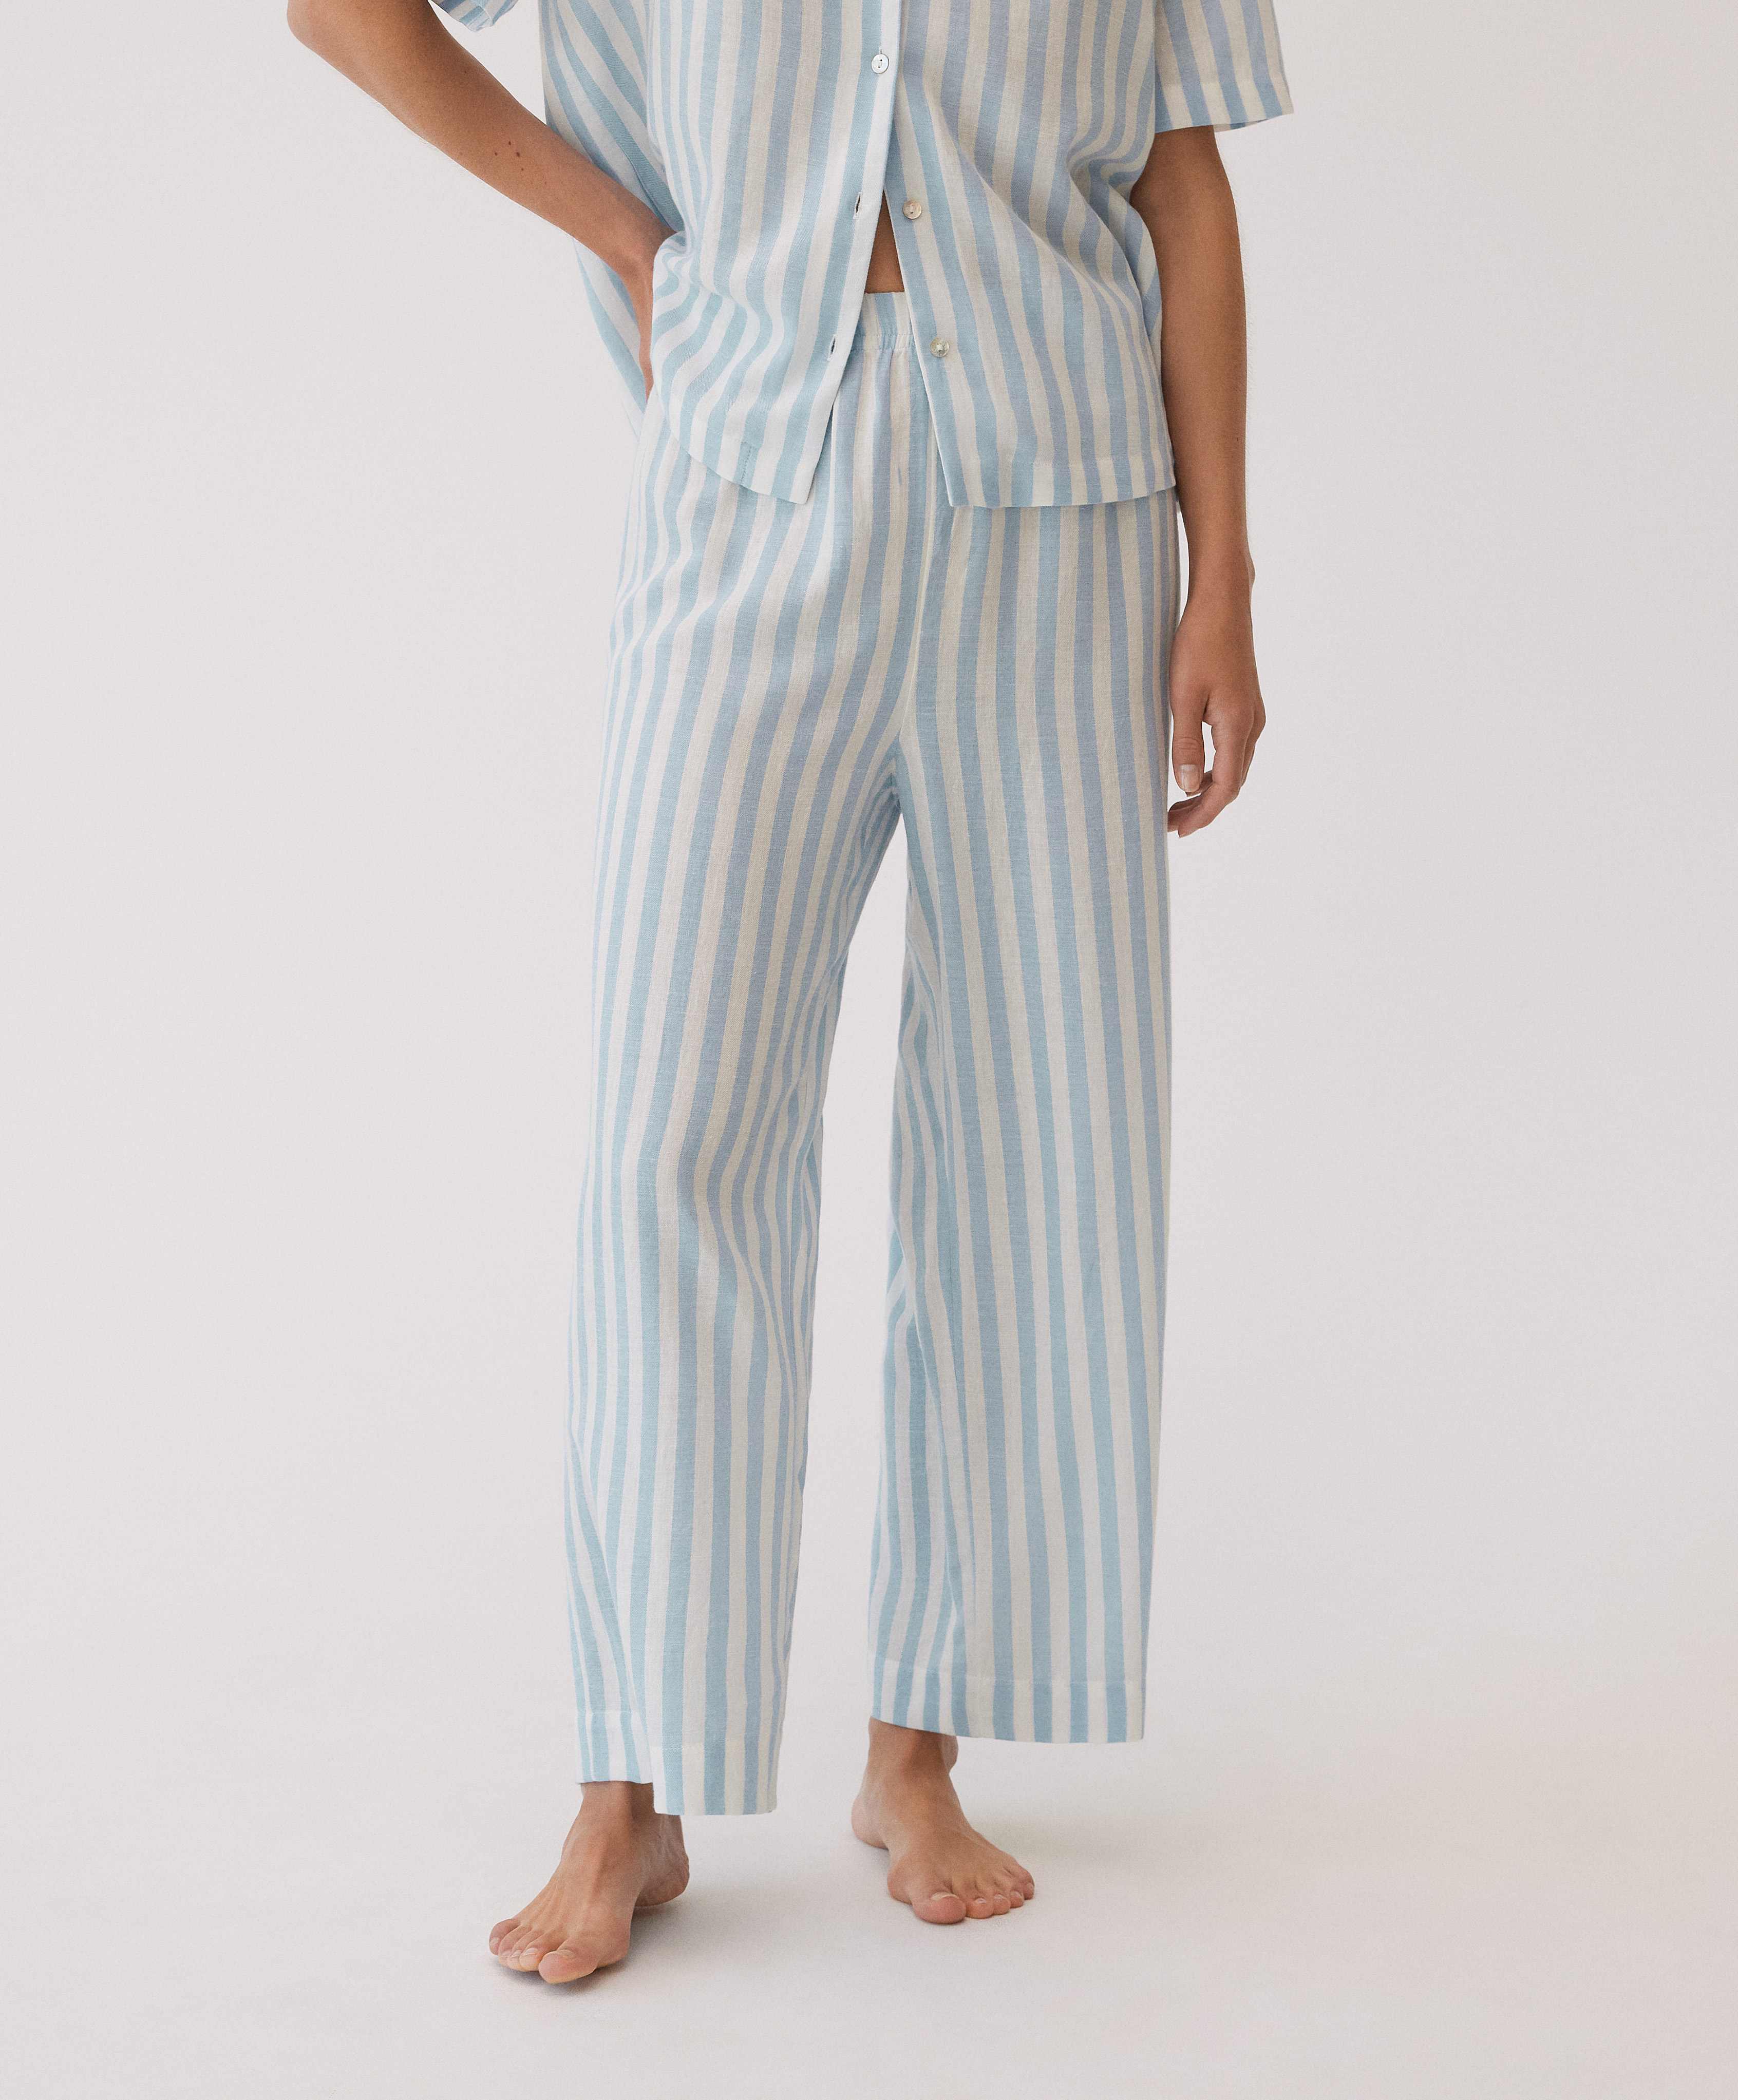 Striped cotton trousers